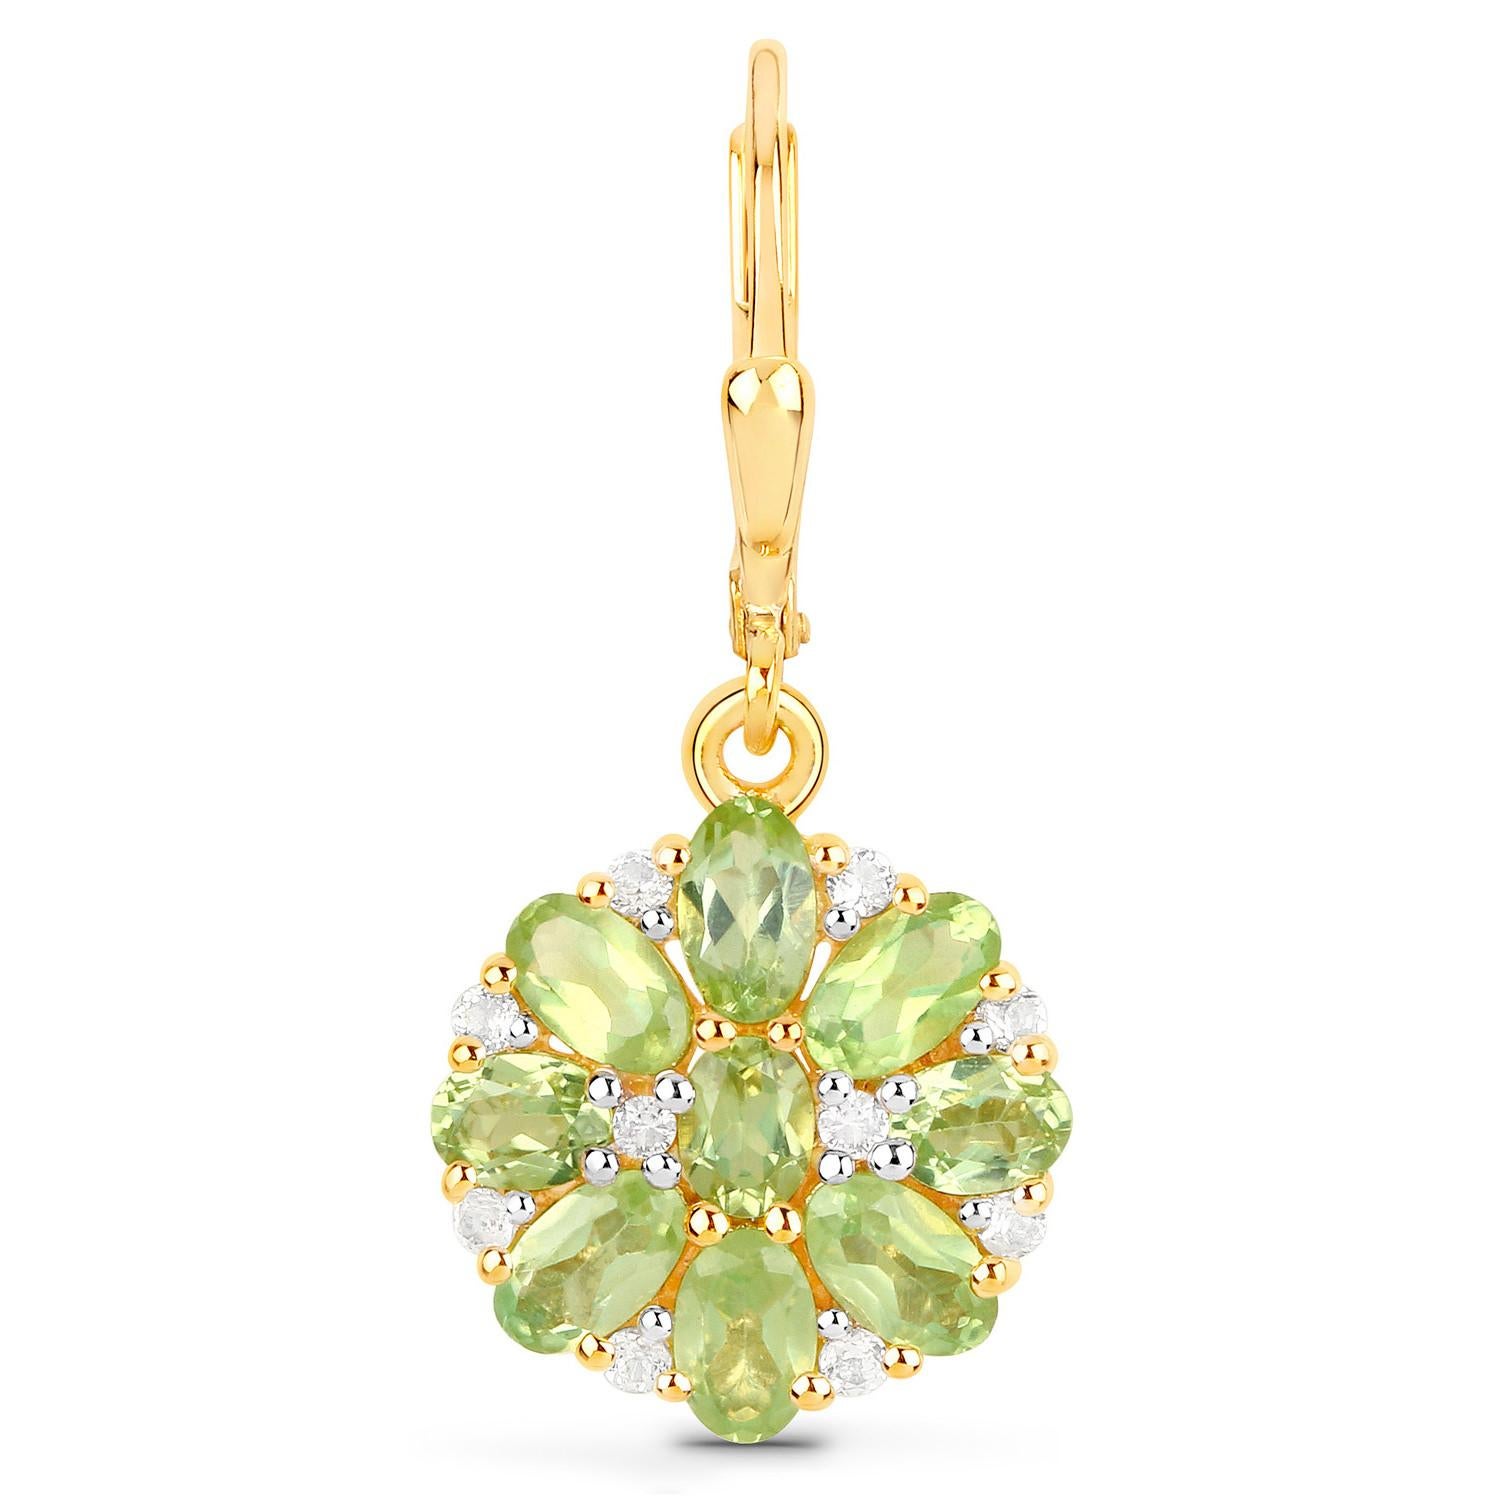 Mixed Cut Natural Peridot Cluster Earrings White Topaz 4.2 Carats 18K Gold Plated Silver For Sale